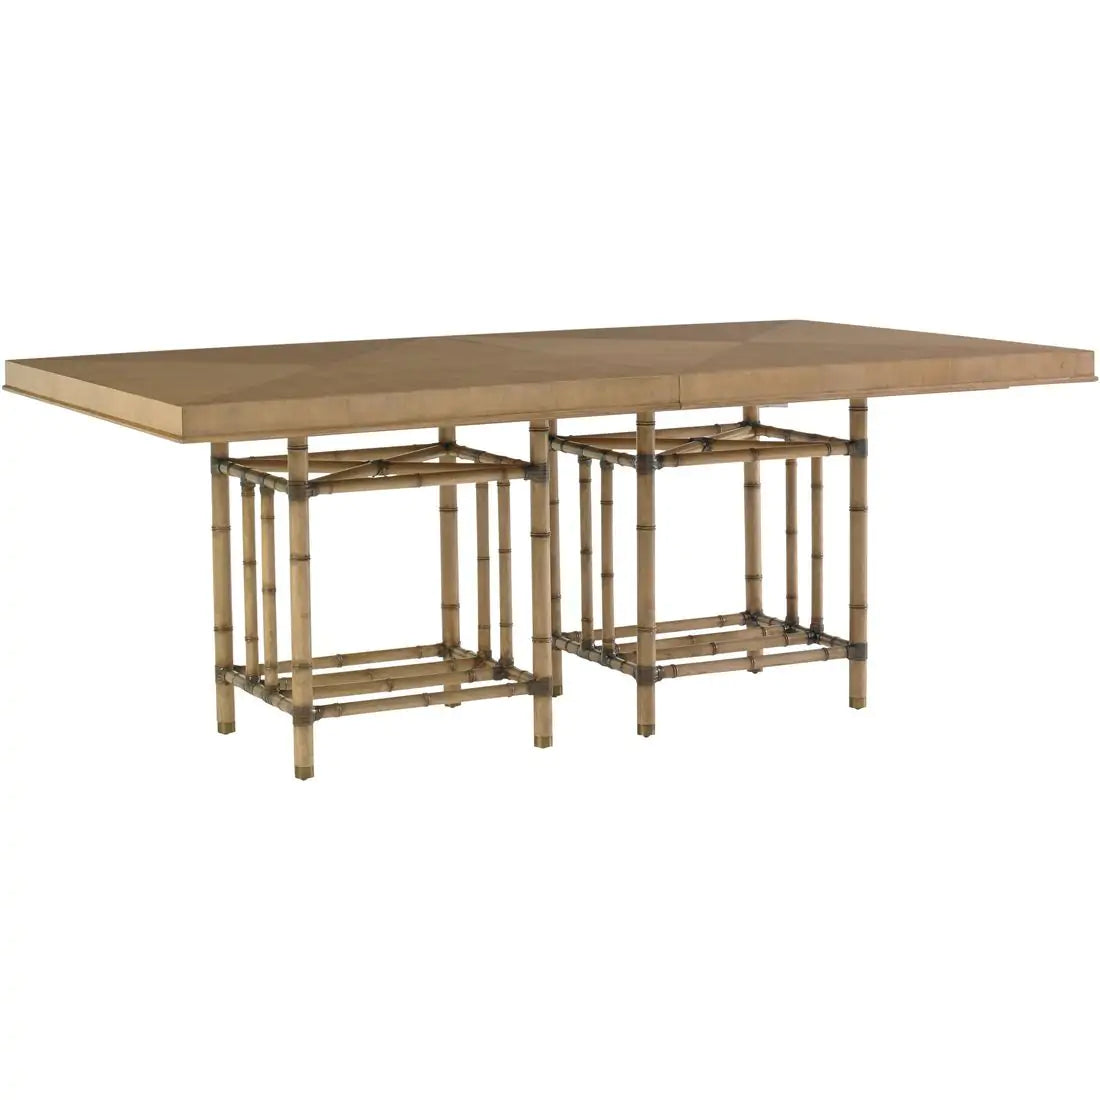 CANEEL BAY DINING TABLE	TOMMY BAHAMA HOME	TWIN PALMS